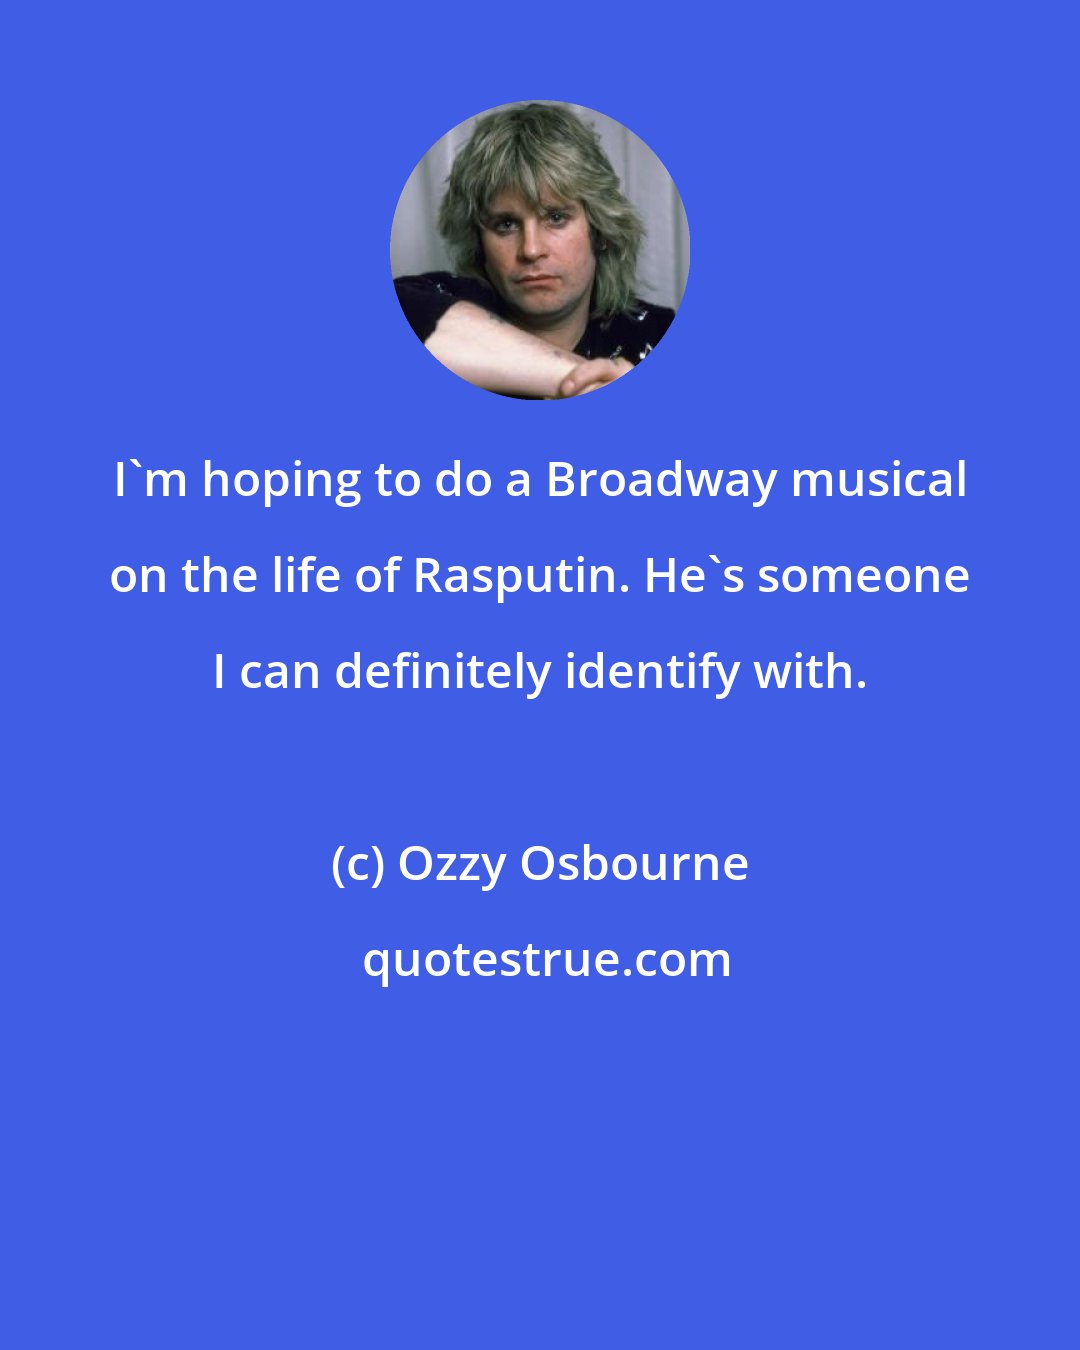 Ozzy Osbourne: I'm hoping to do a Broadway musical on the life of Rasputin. He's someone I can definitely identify with.